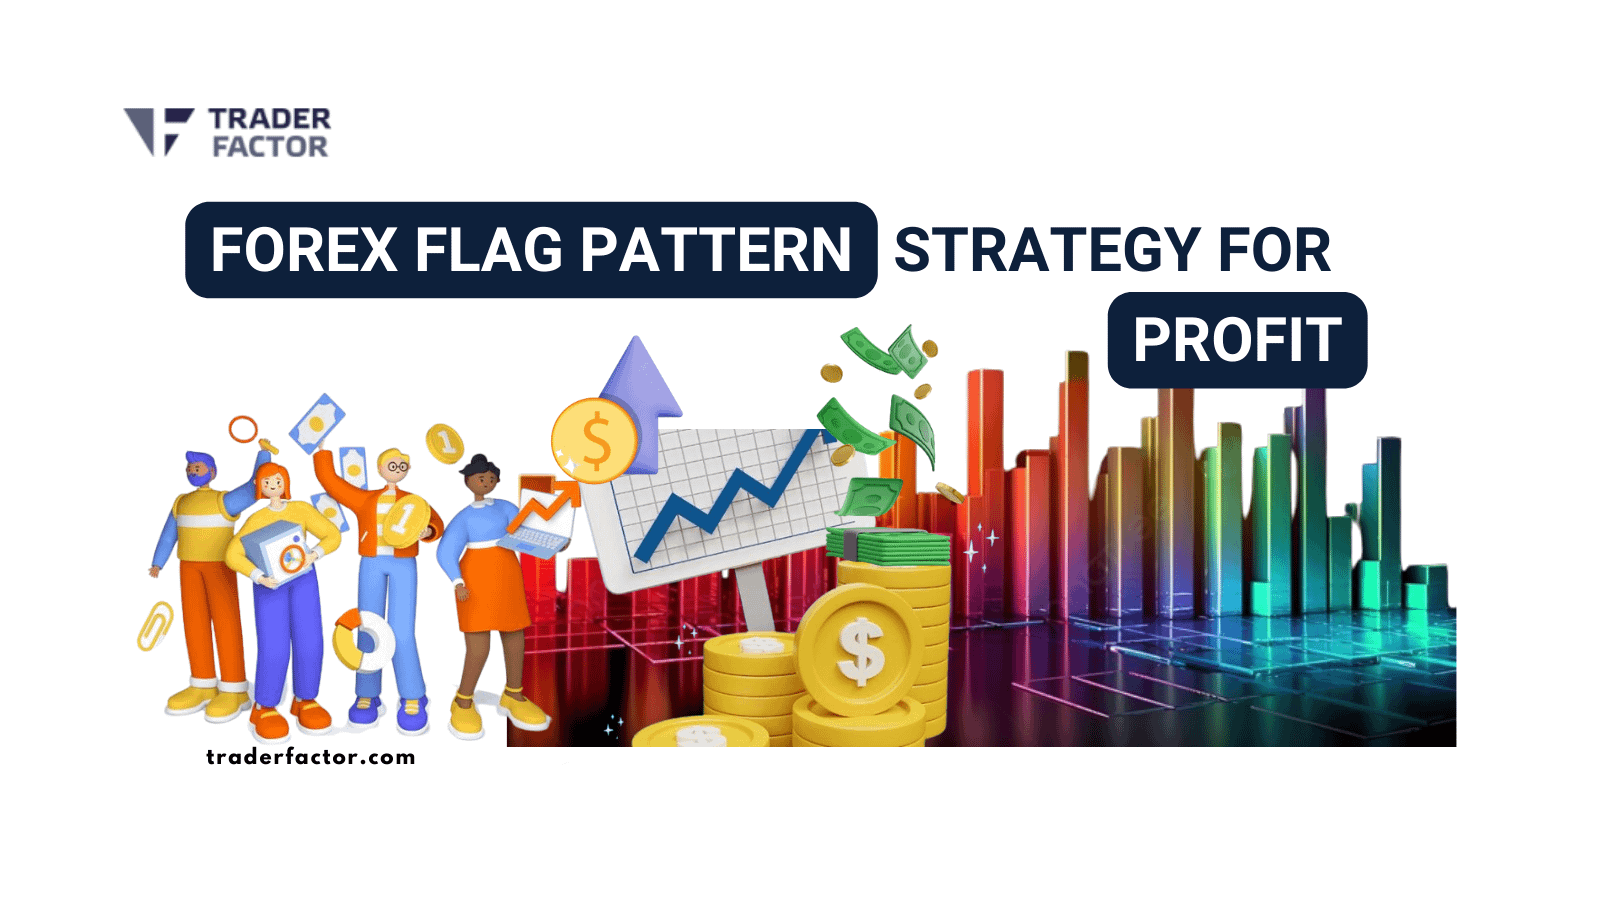 Forex flag pattern strategy for profit